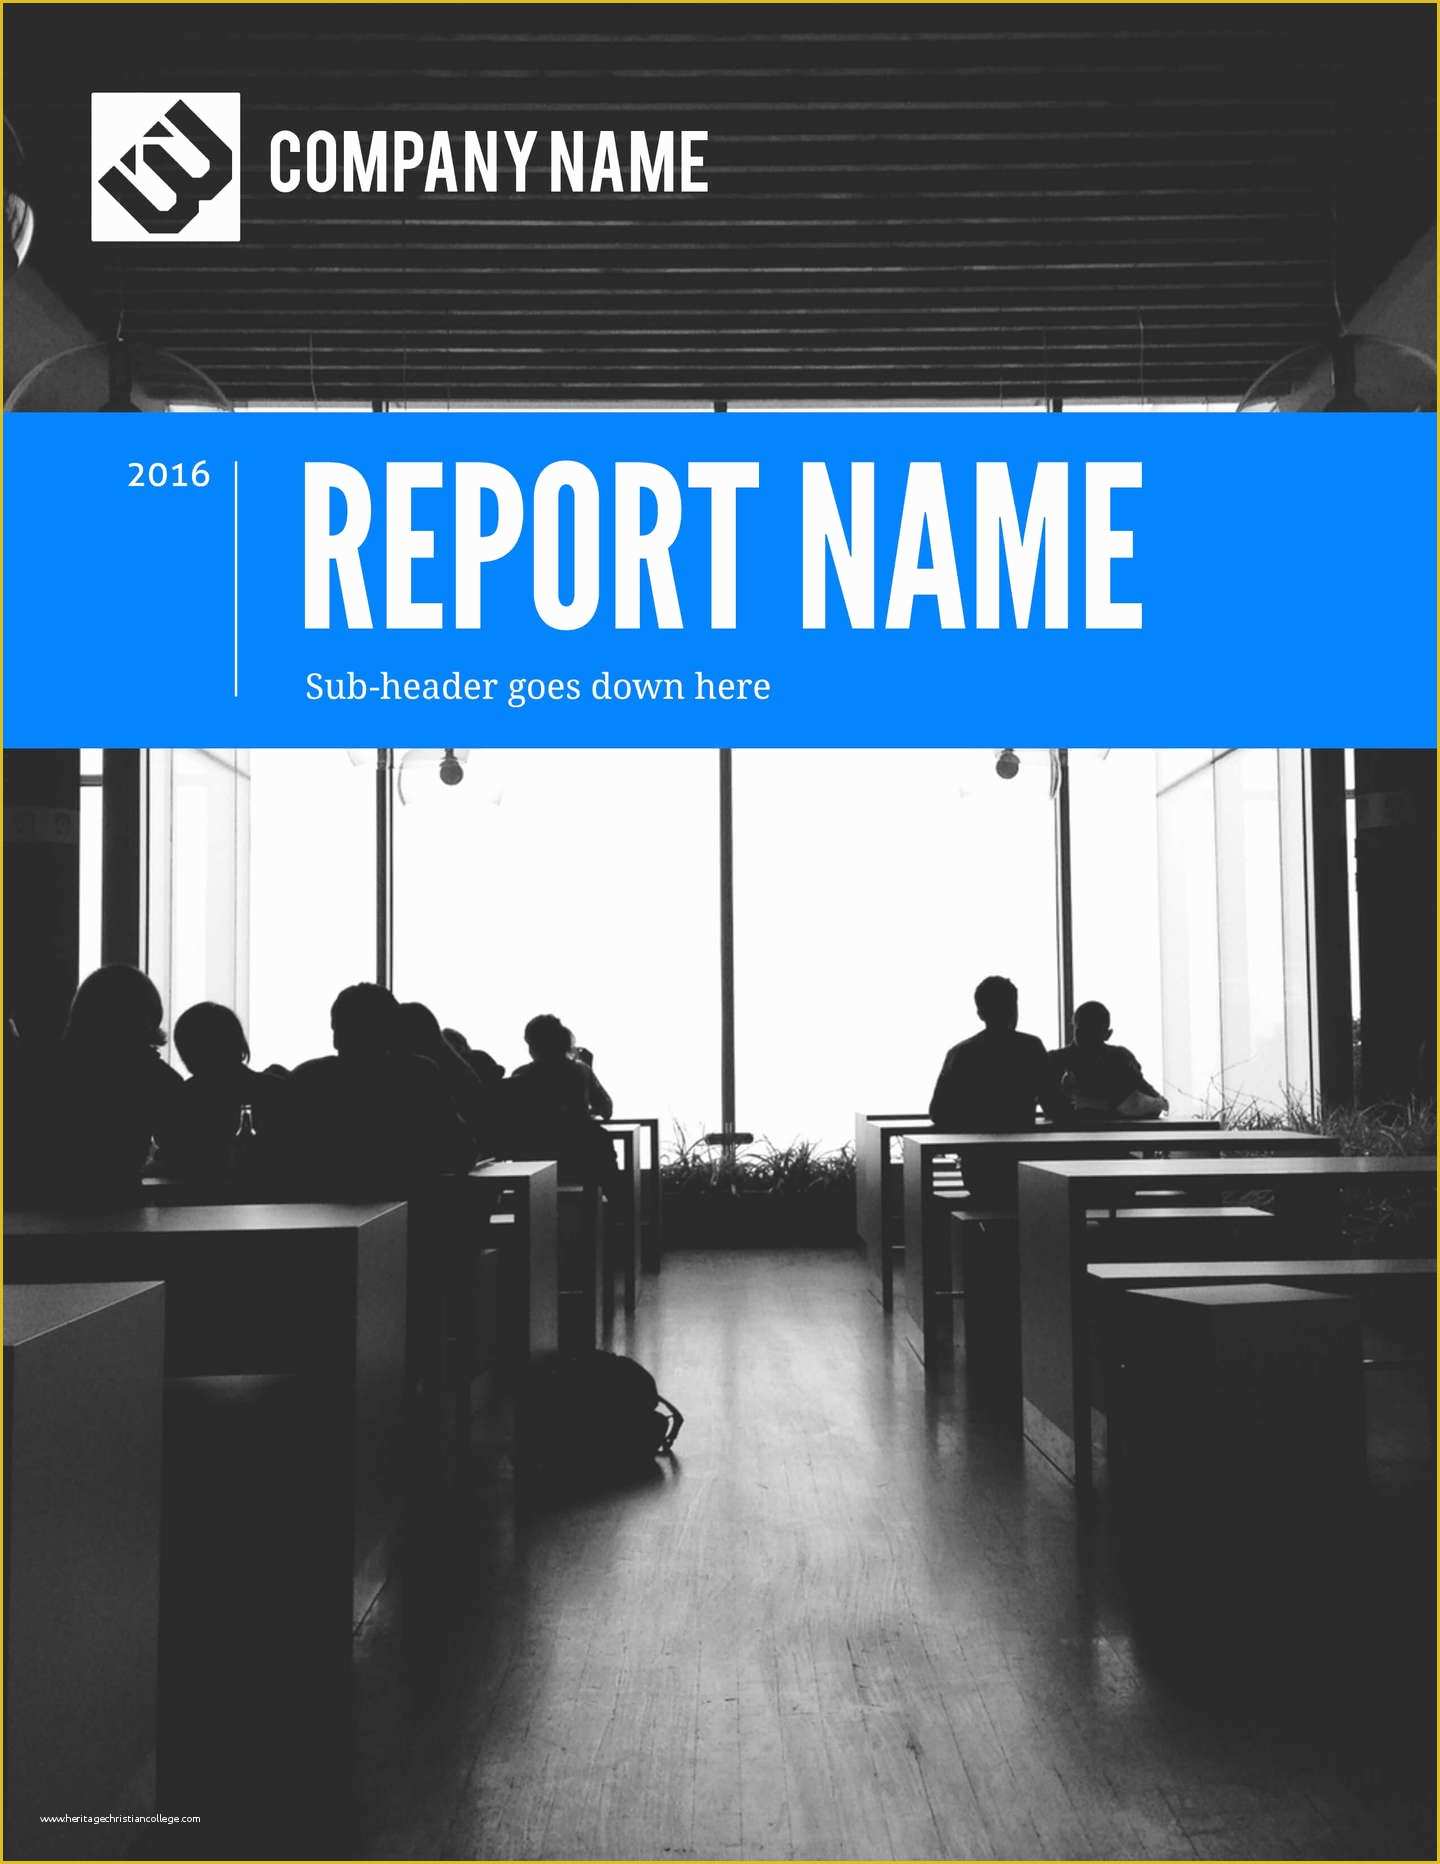 Free Business Report Template Of Free Design Templates for Business & Education